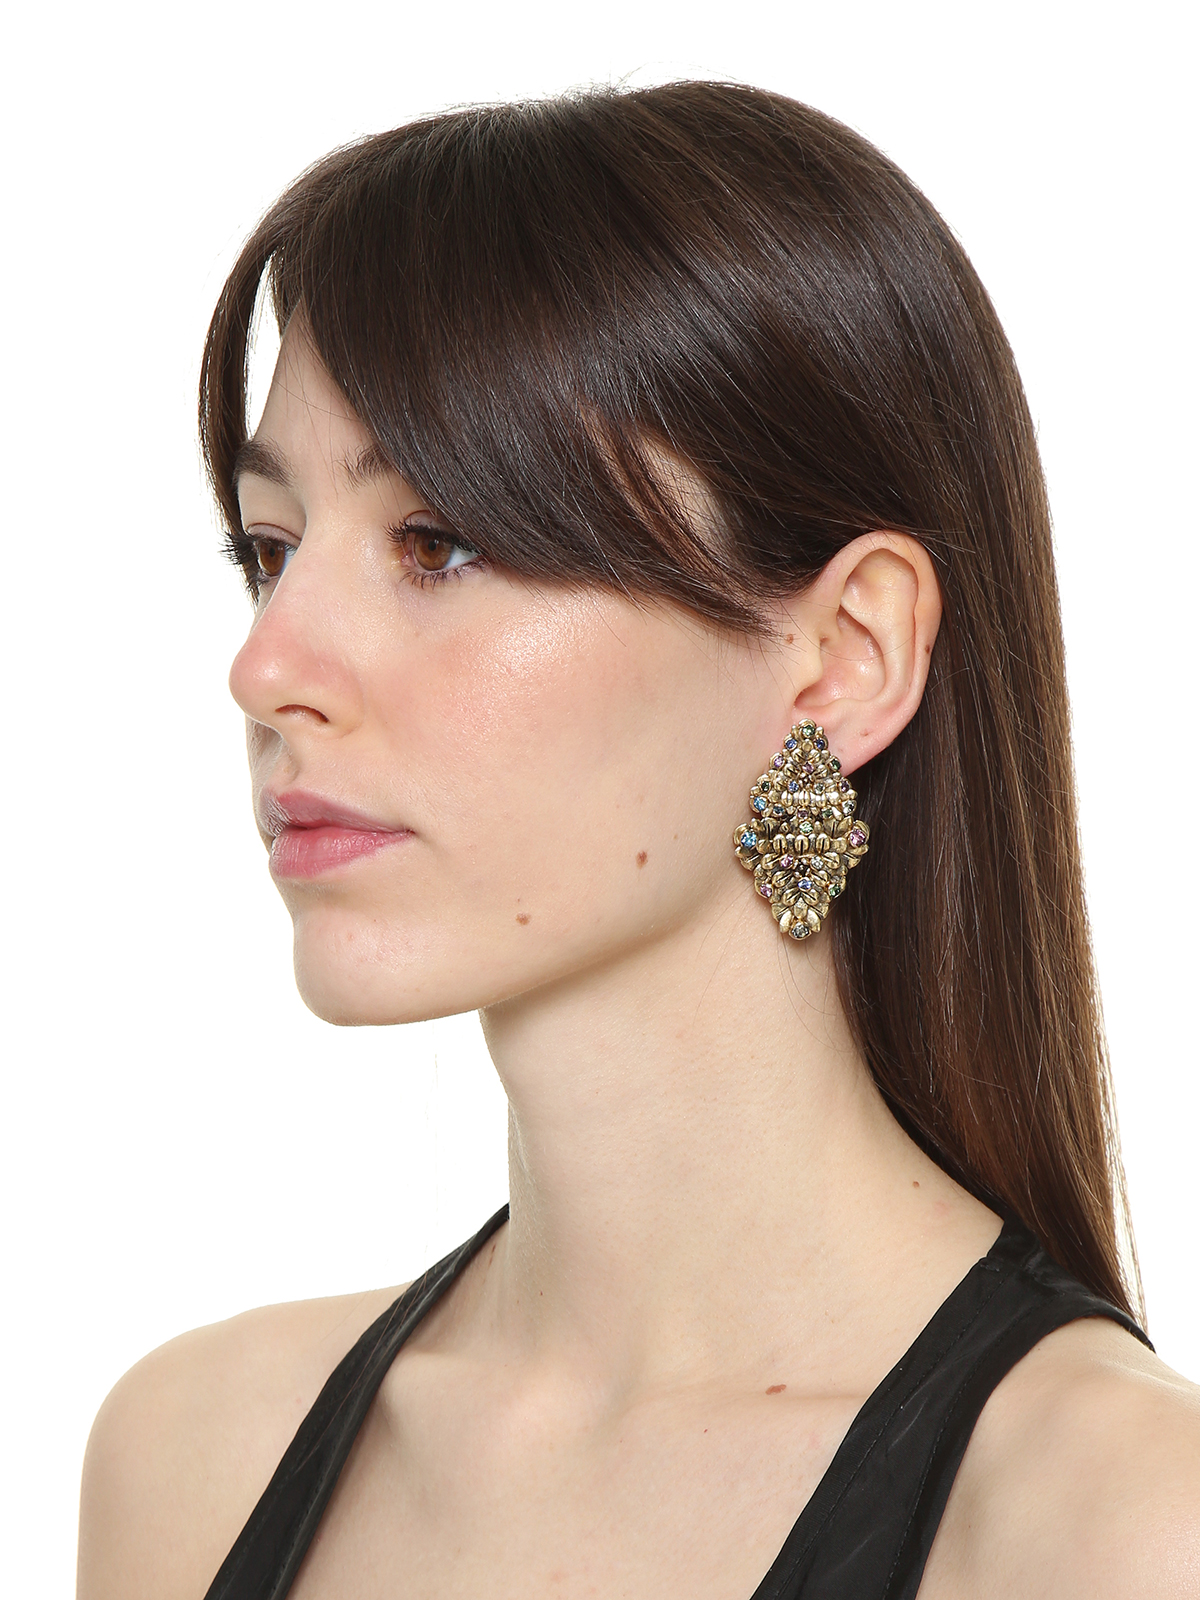 Triangular flower earrings embellished with multicolor stones 